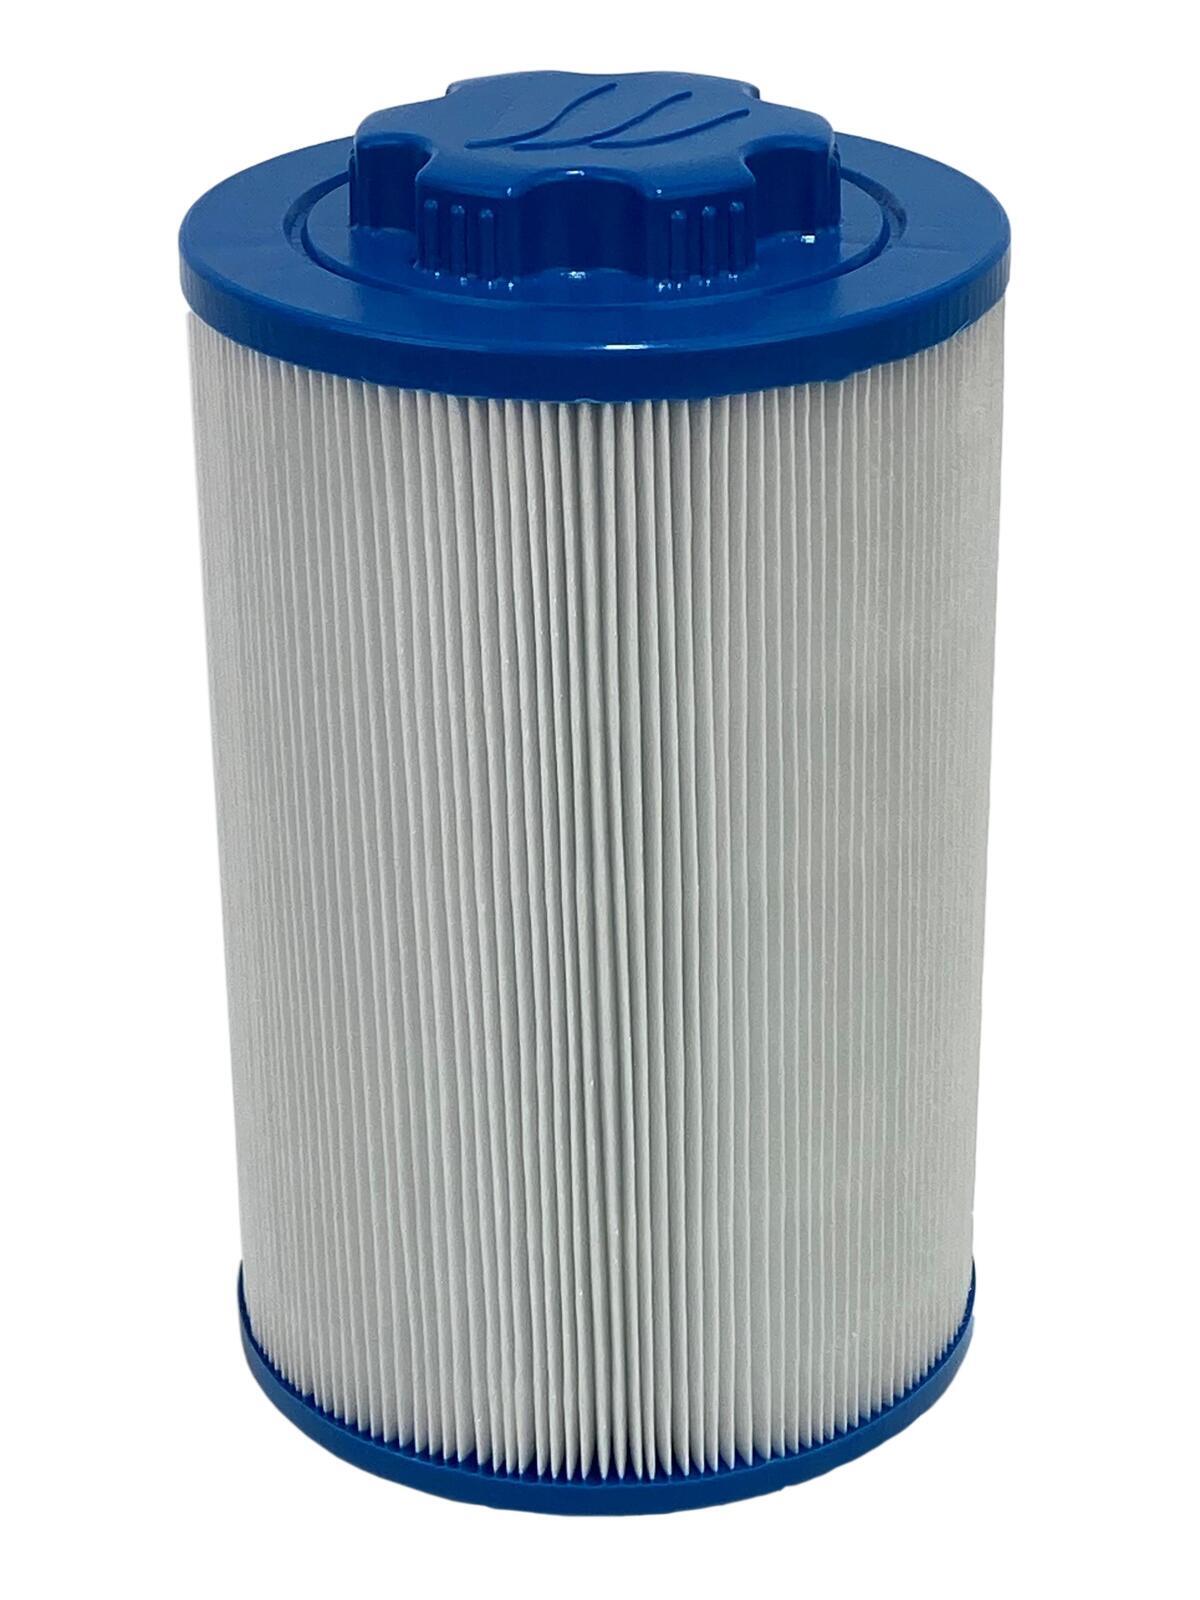 Oasis Spas Cam / Twist Lock Filter - Refresh your spa with our high-performance filter